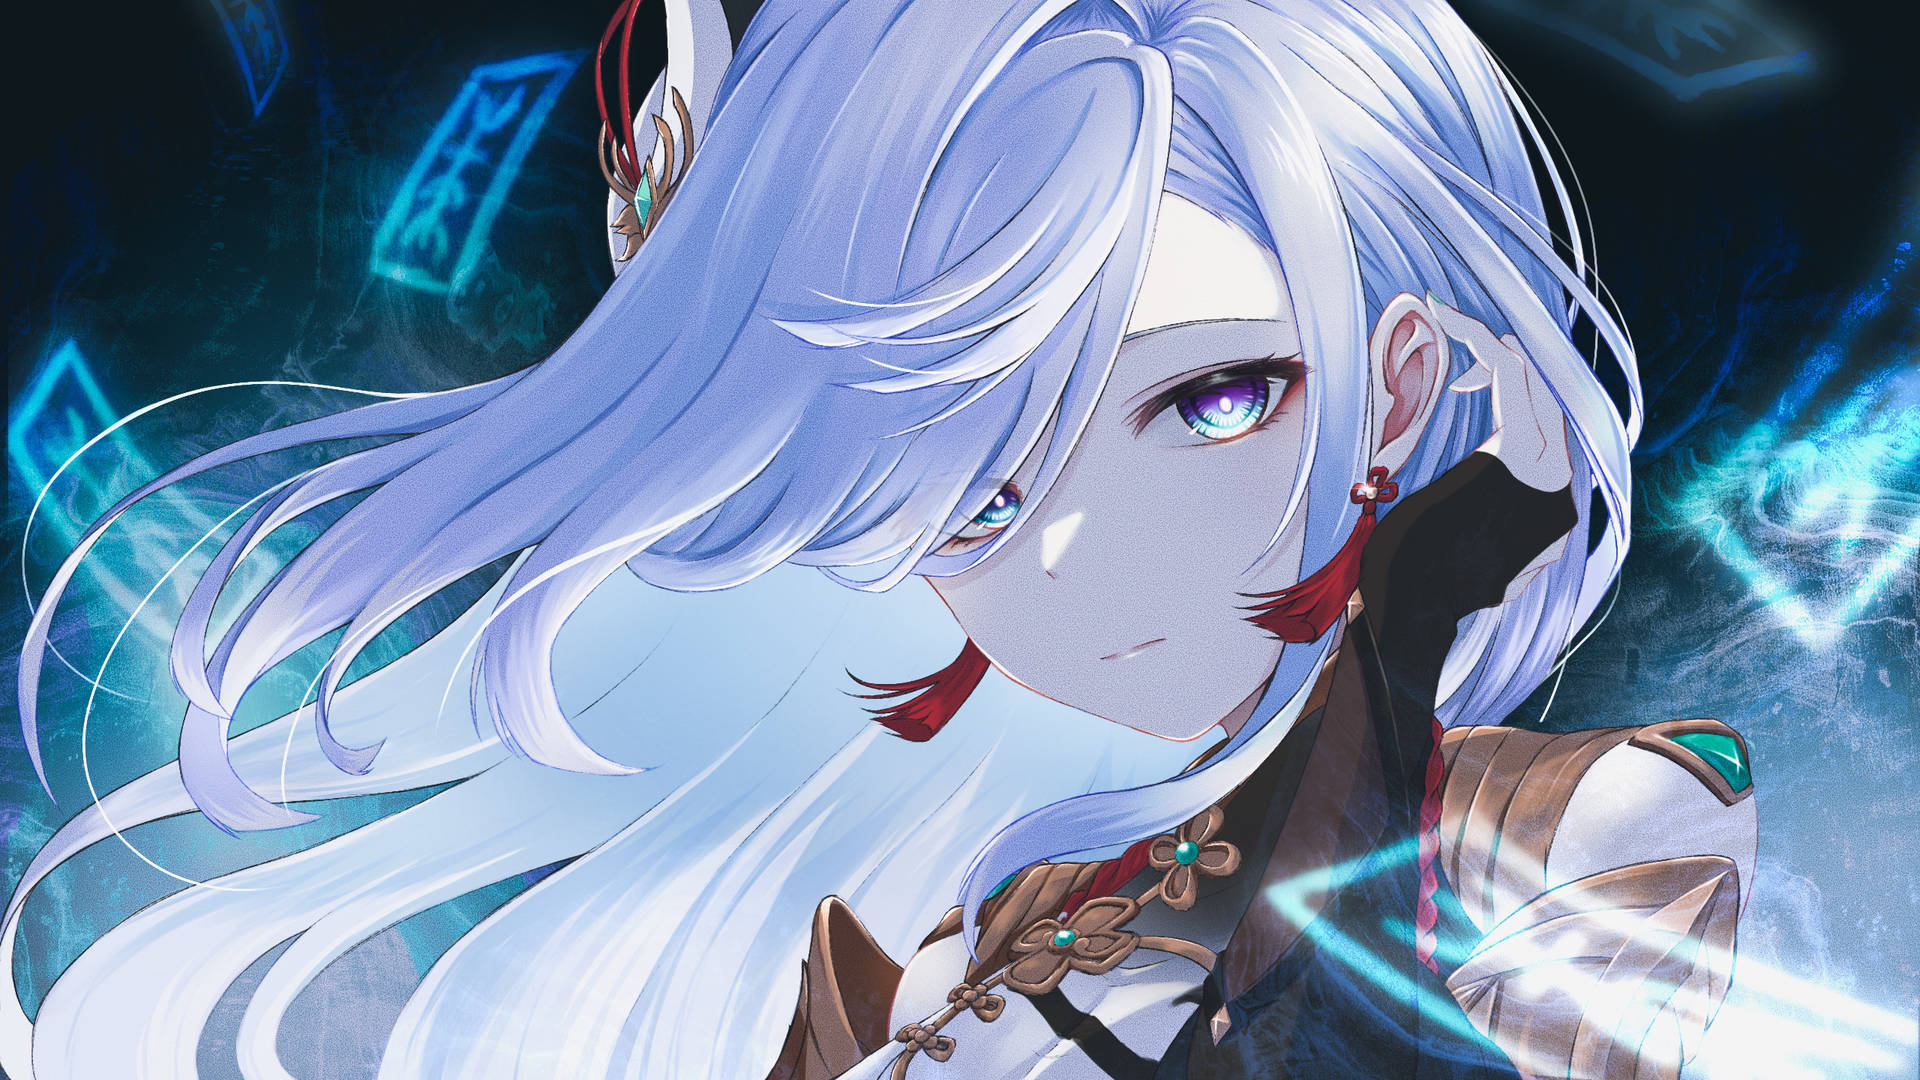 a girl with white hair and blue eyes Wallpaper